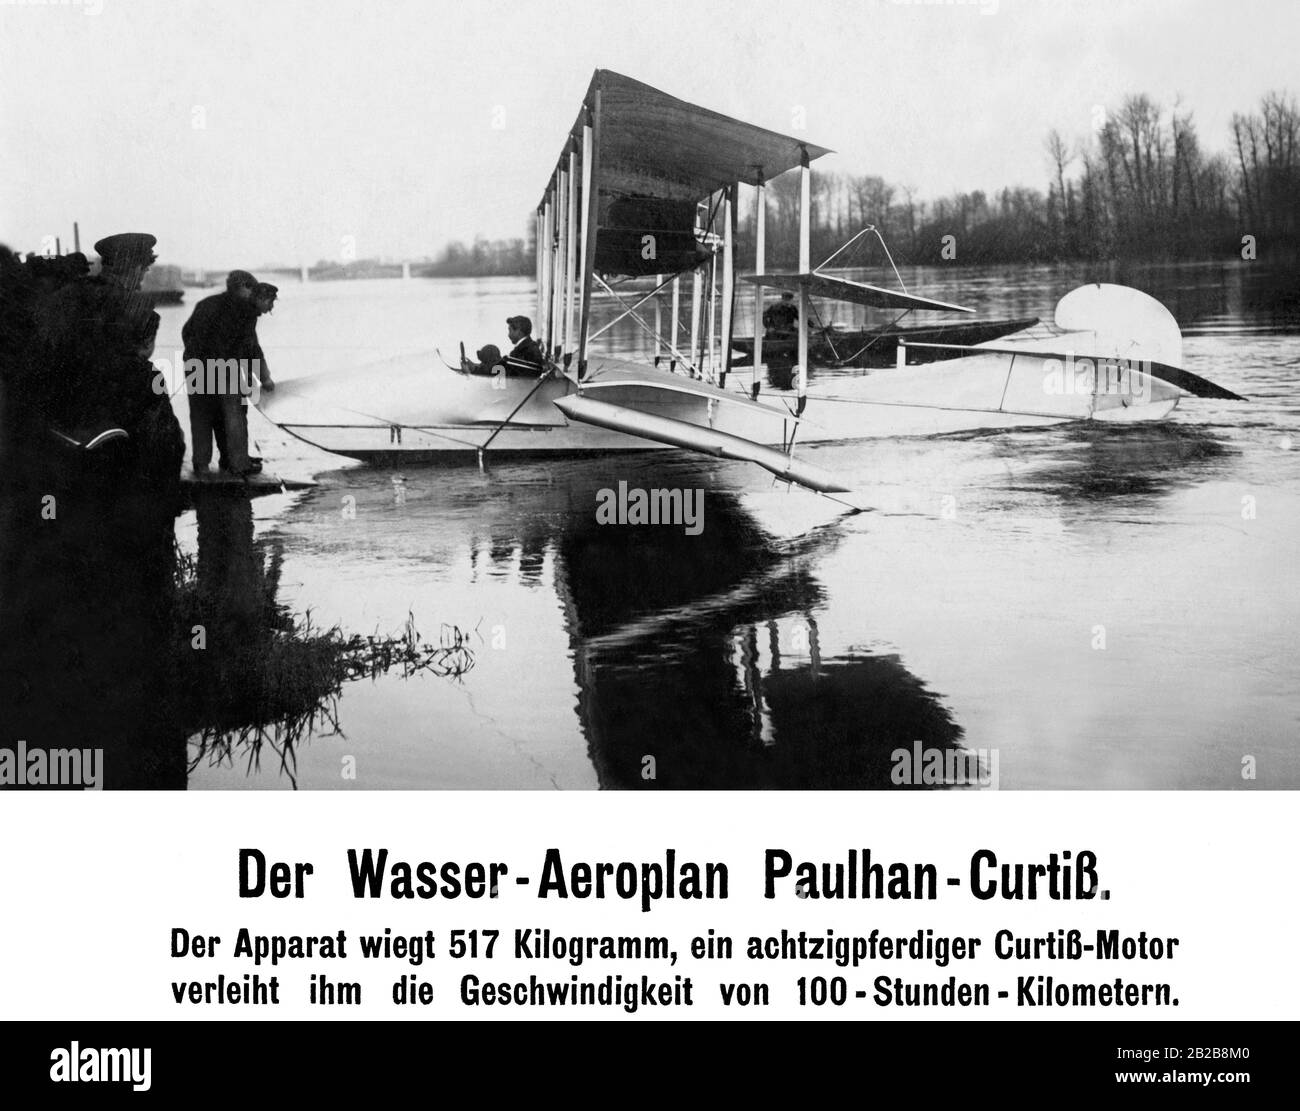 The Paulhan-Curtiss seaplane with 80PS Curtiss engine reached a top speed of 100 km/h. Stock Photo